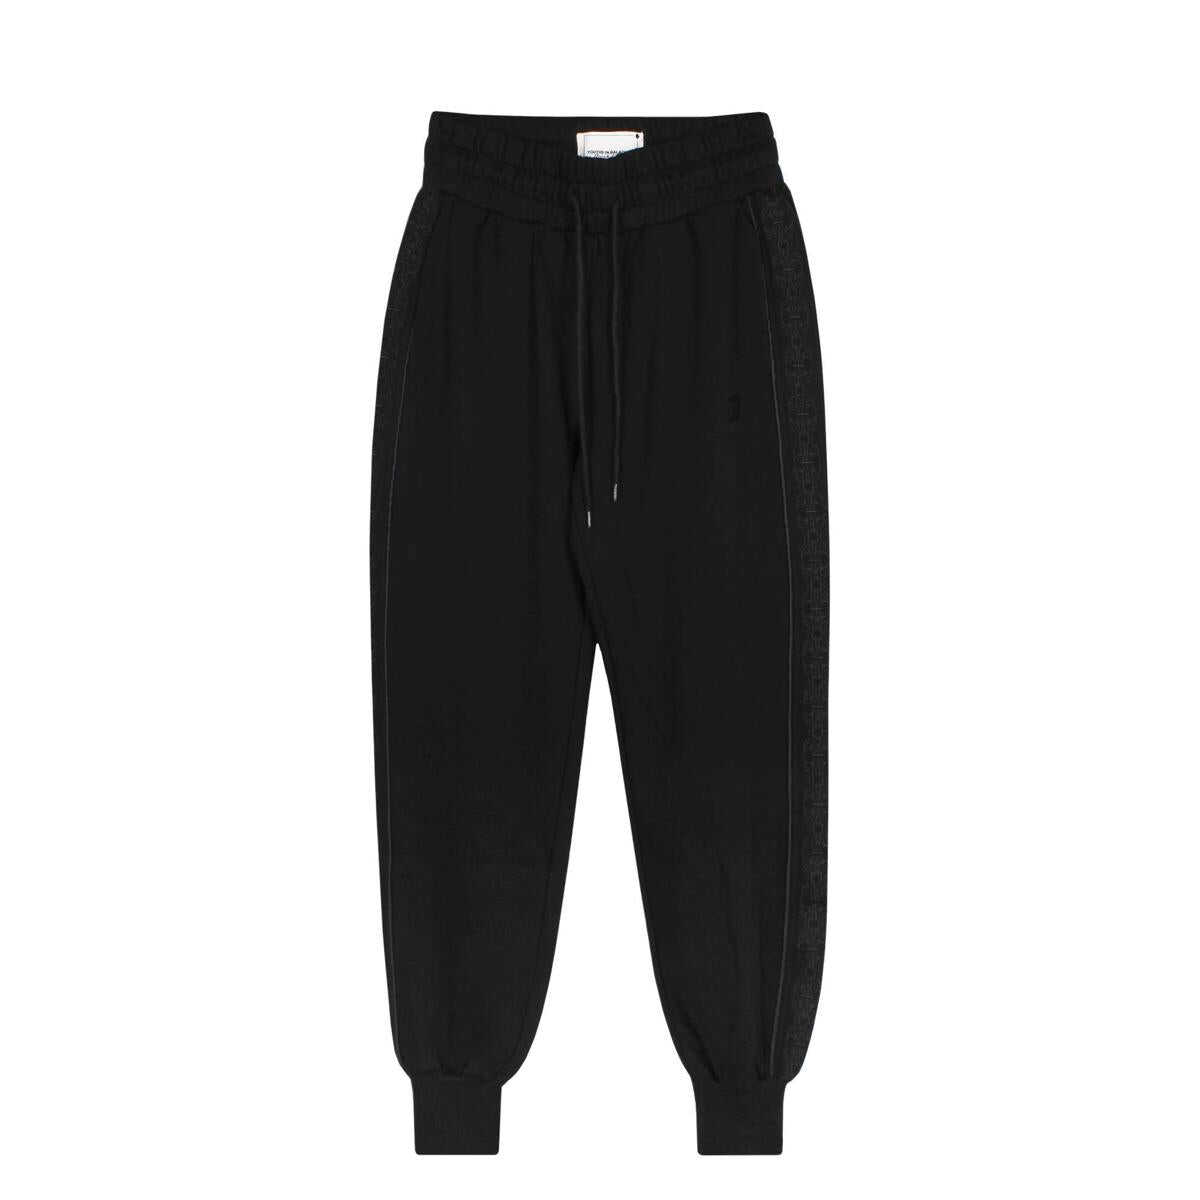 YOUTHS IN BALACLAVA YOUTHS IN BALACLAVA TRACK SPINE PANTS nero